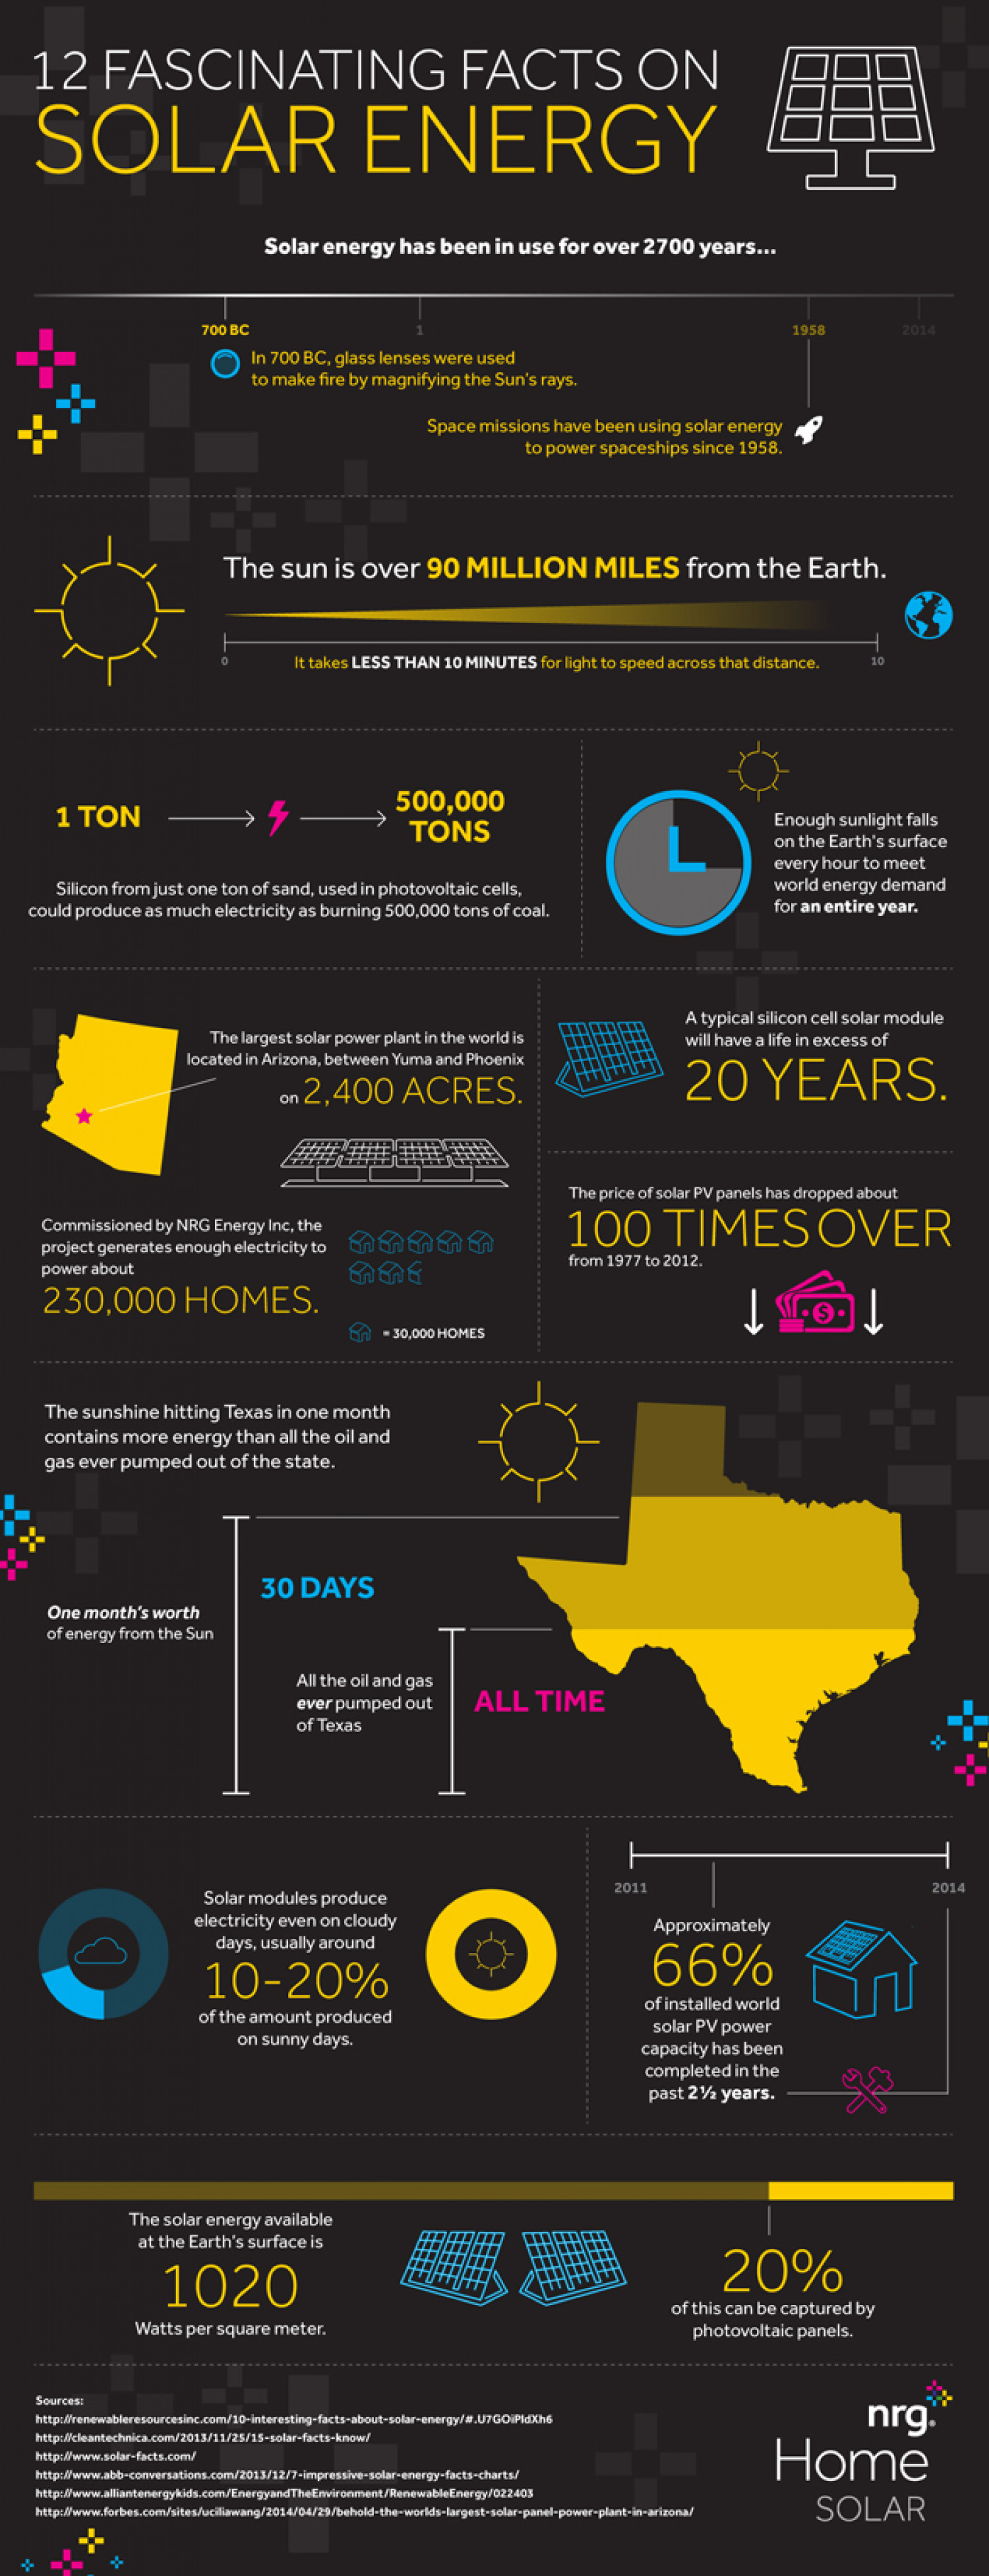 12 Fascinating Facts on Solar Energy Infographic